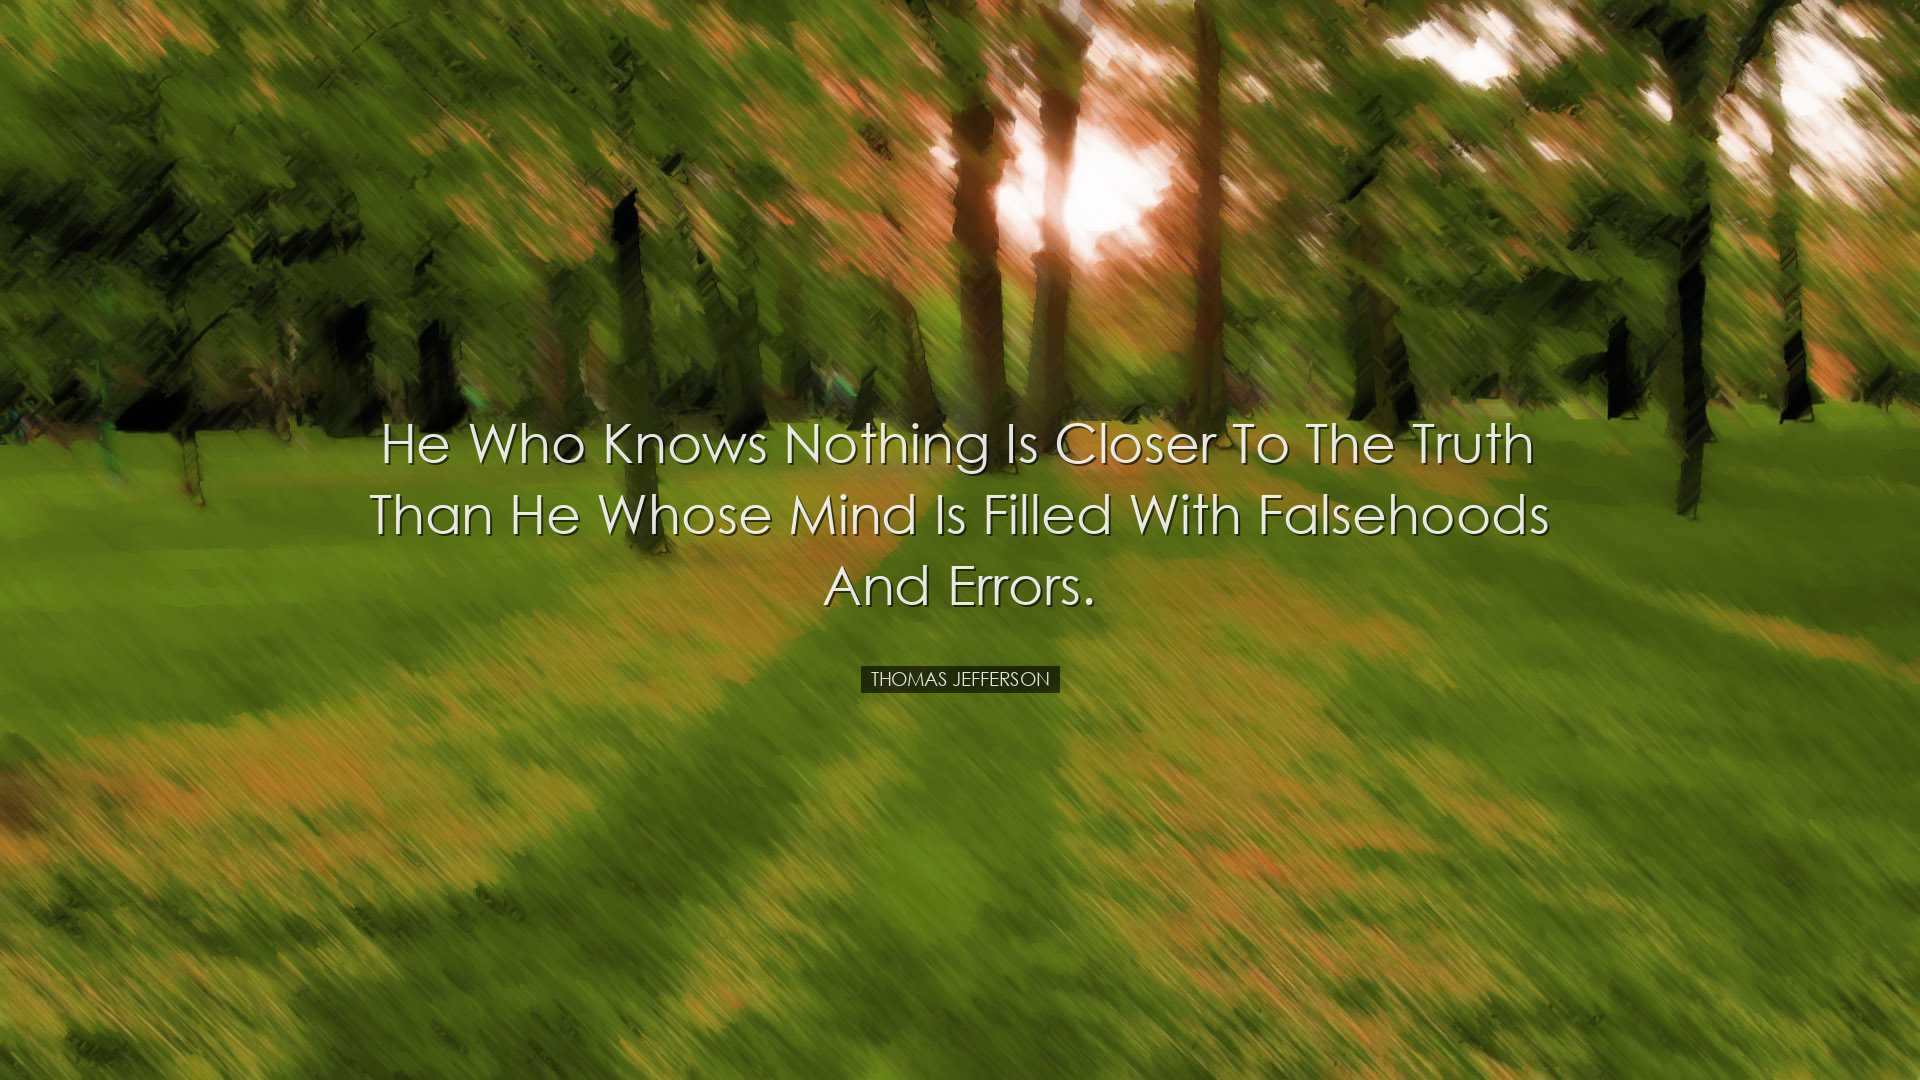 He who knows nothing is closer to the truth than he whose mind is